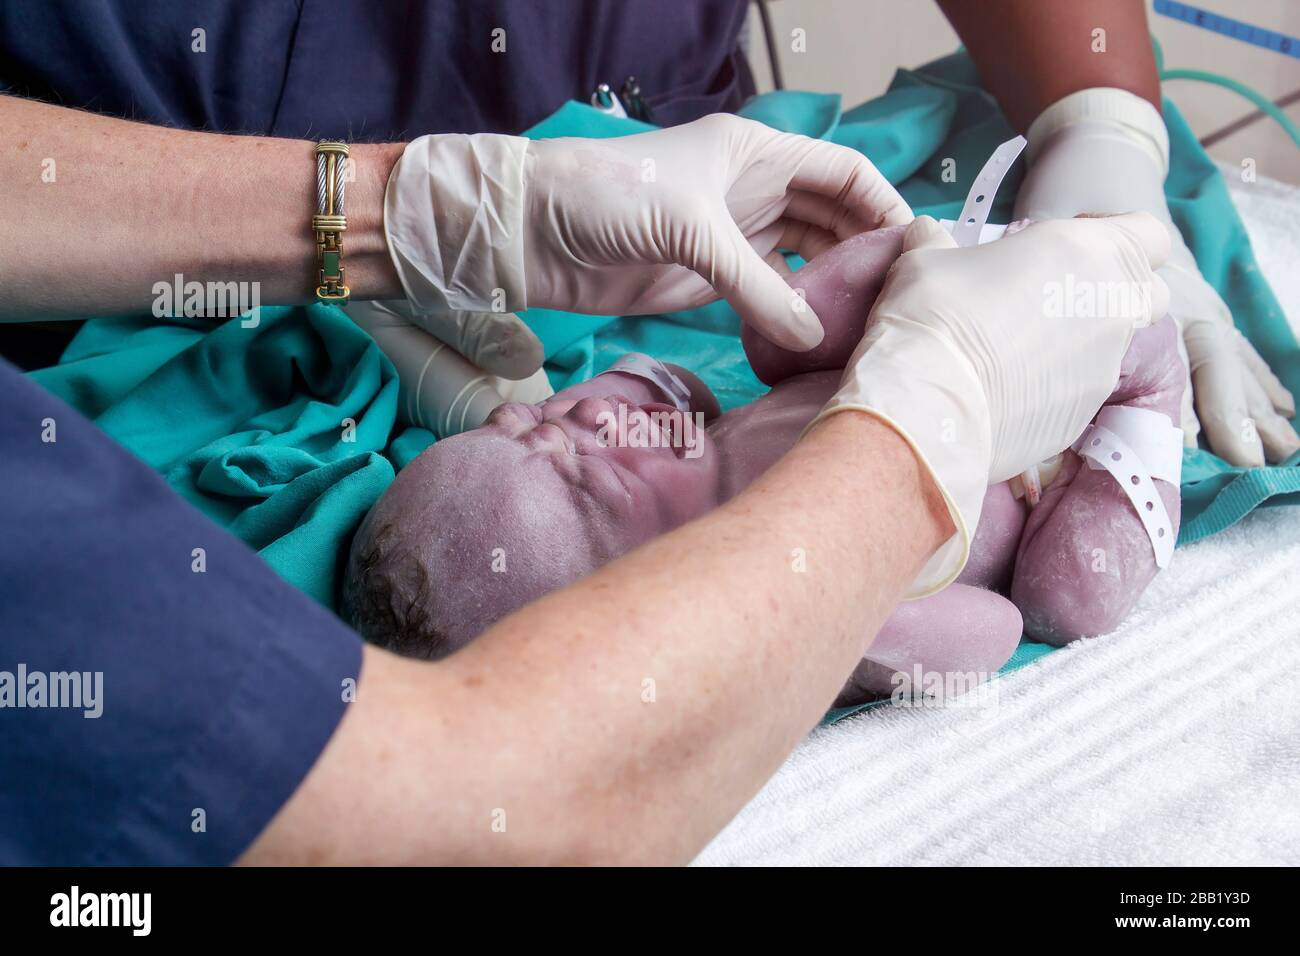 Doctors attending to newborn baby boy in hospital delivery room. He is laying on a bed while the doctors are attending to him and he is crying. Stock Photo